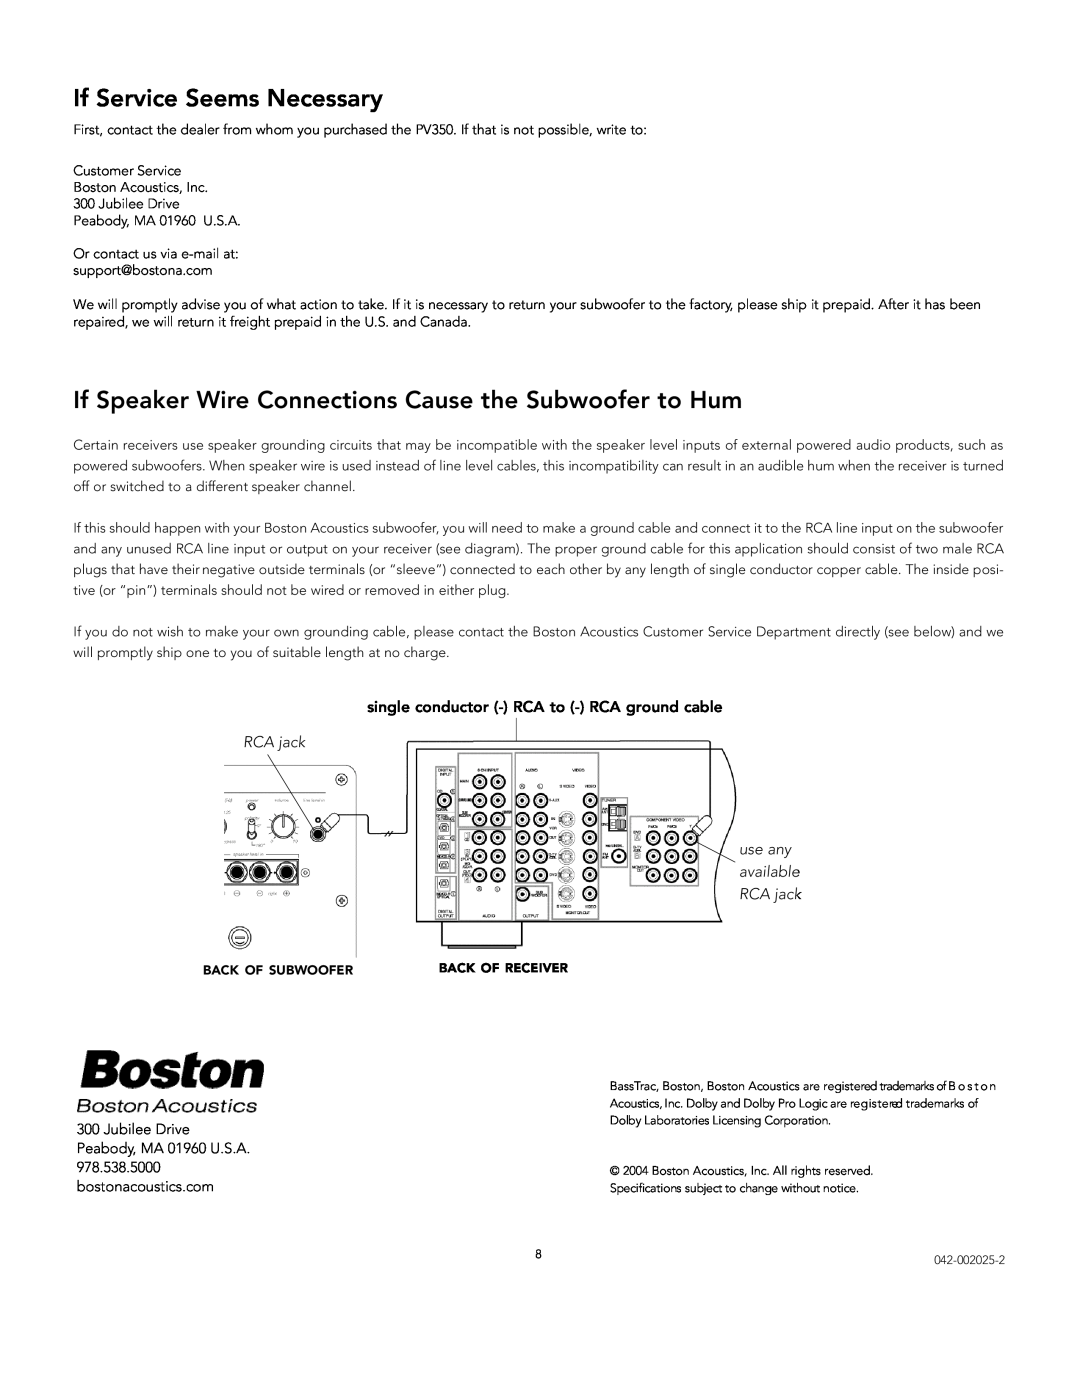 Boston Acoustics PV350 manual If Service Seems Necessary, If Speaker Wire Connections Cause the Subwoofer to Hum 